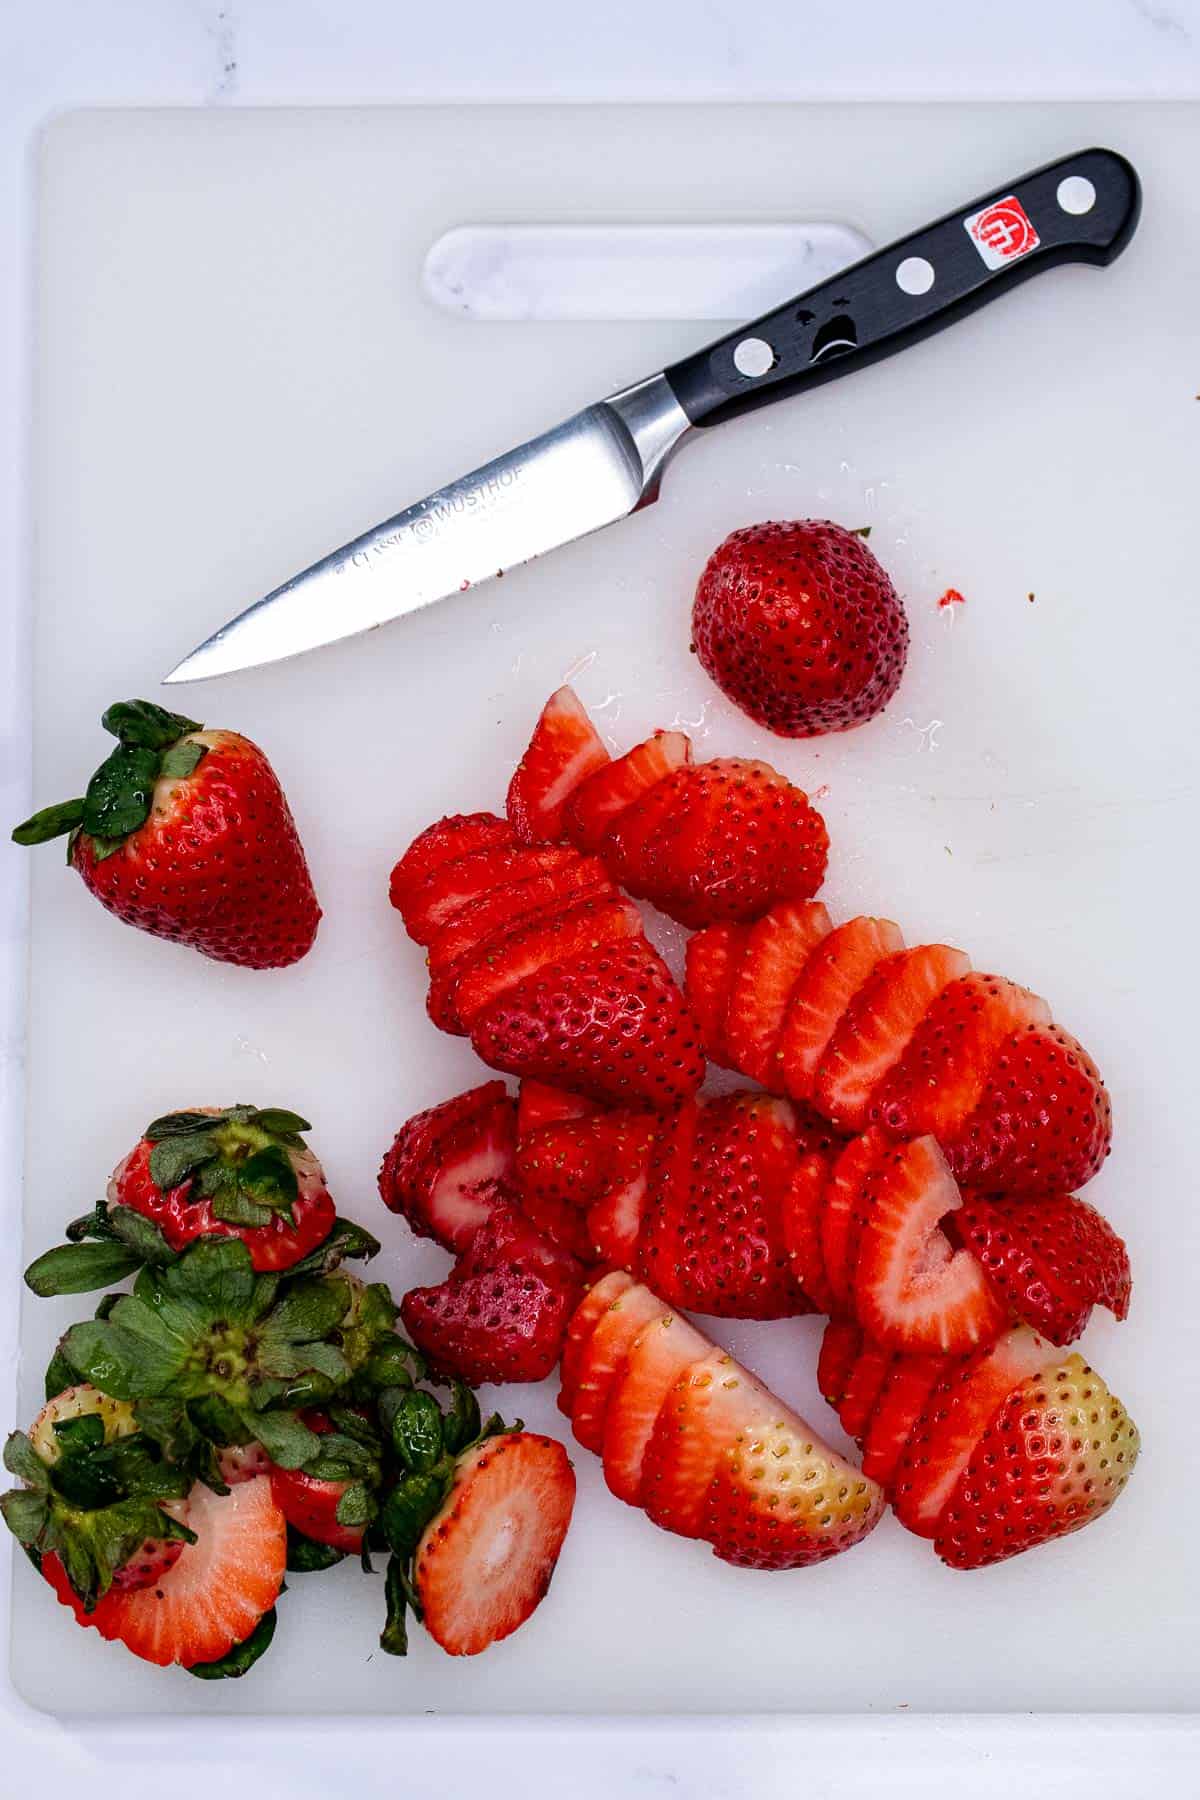 Trimming and slicing strawberries with a paring knife.